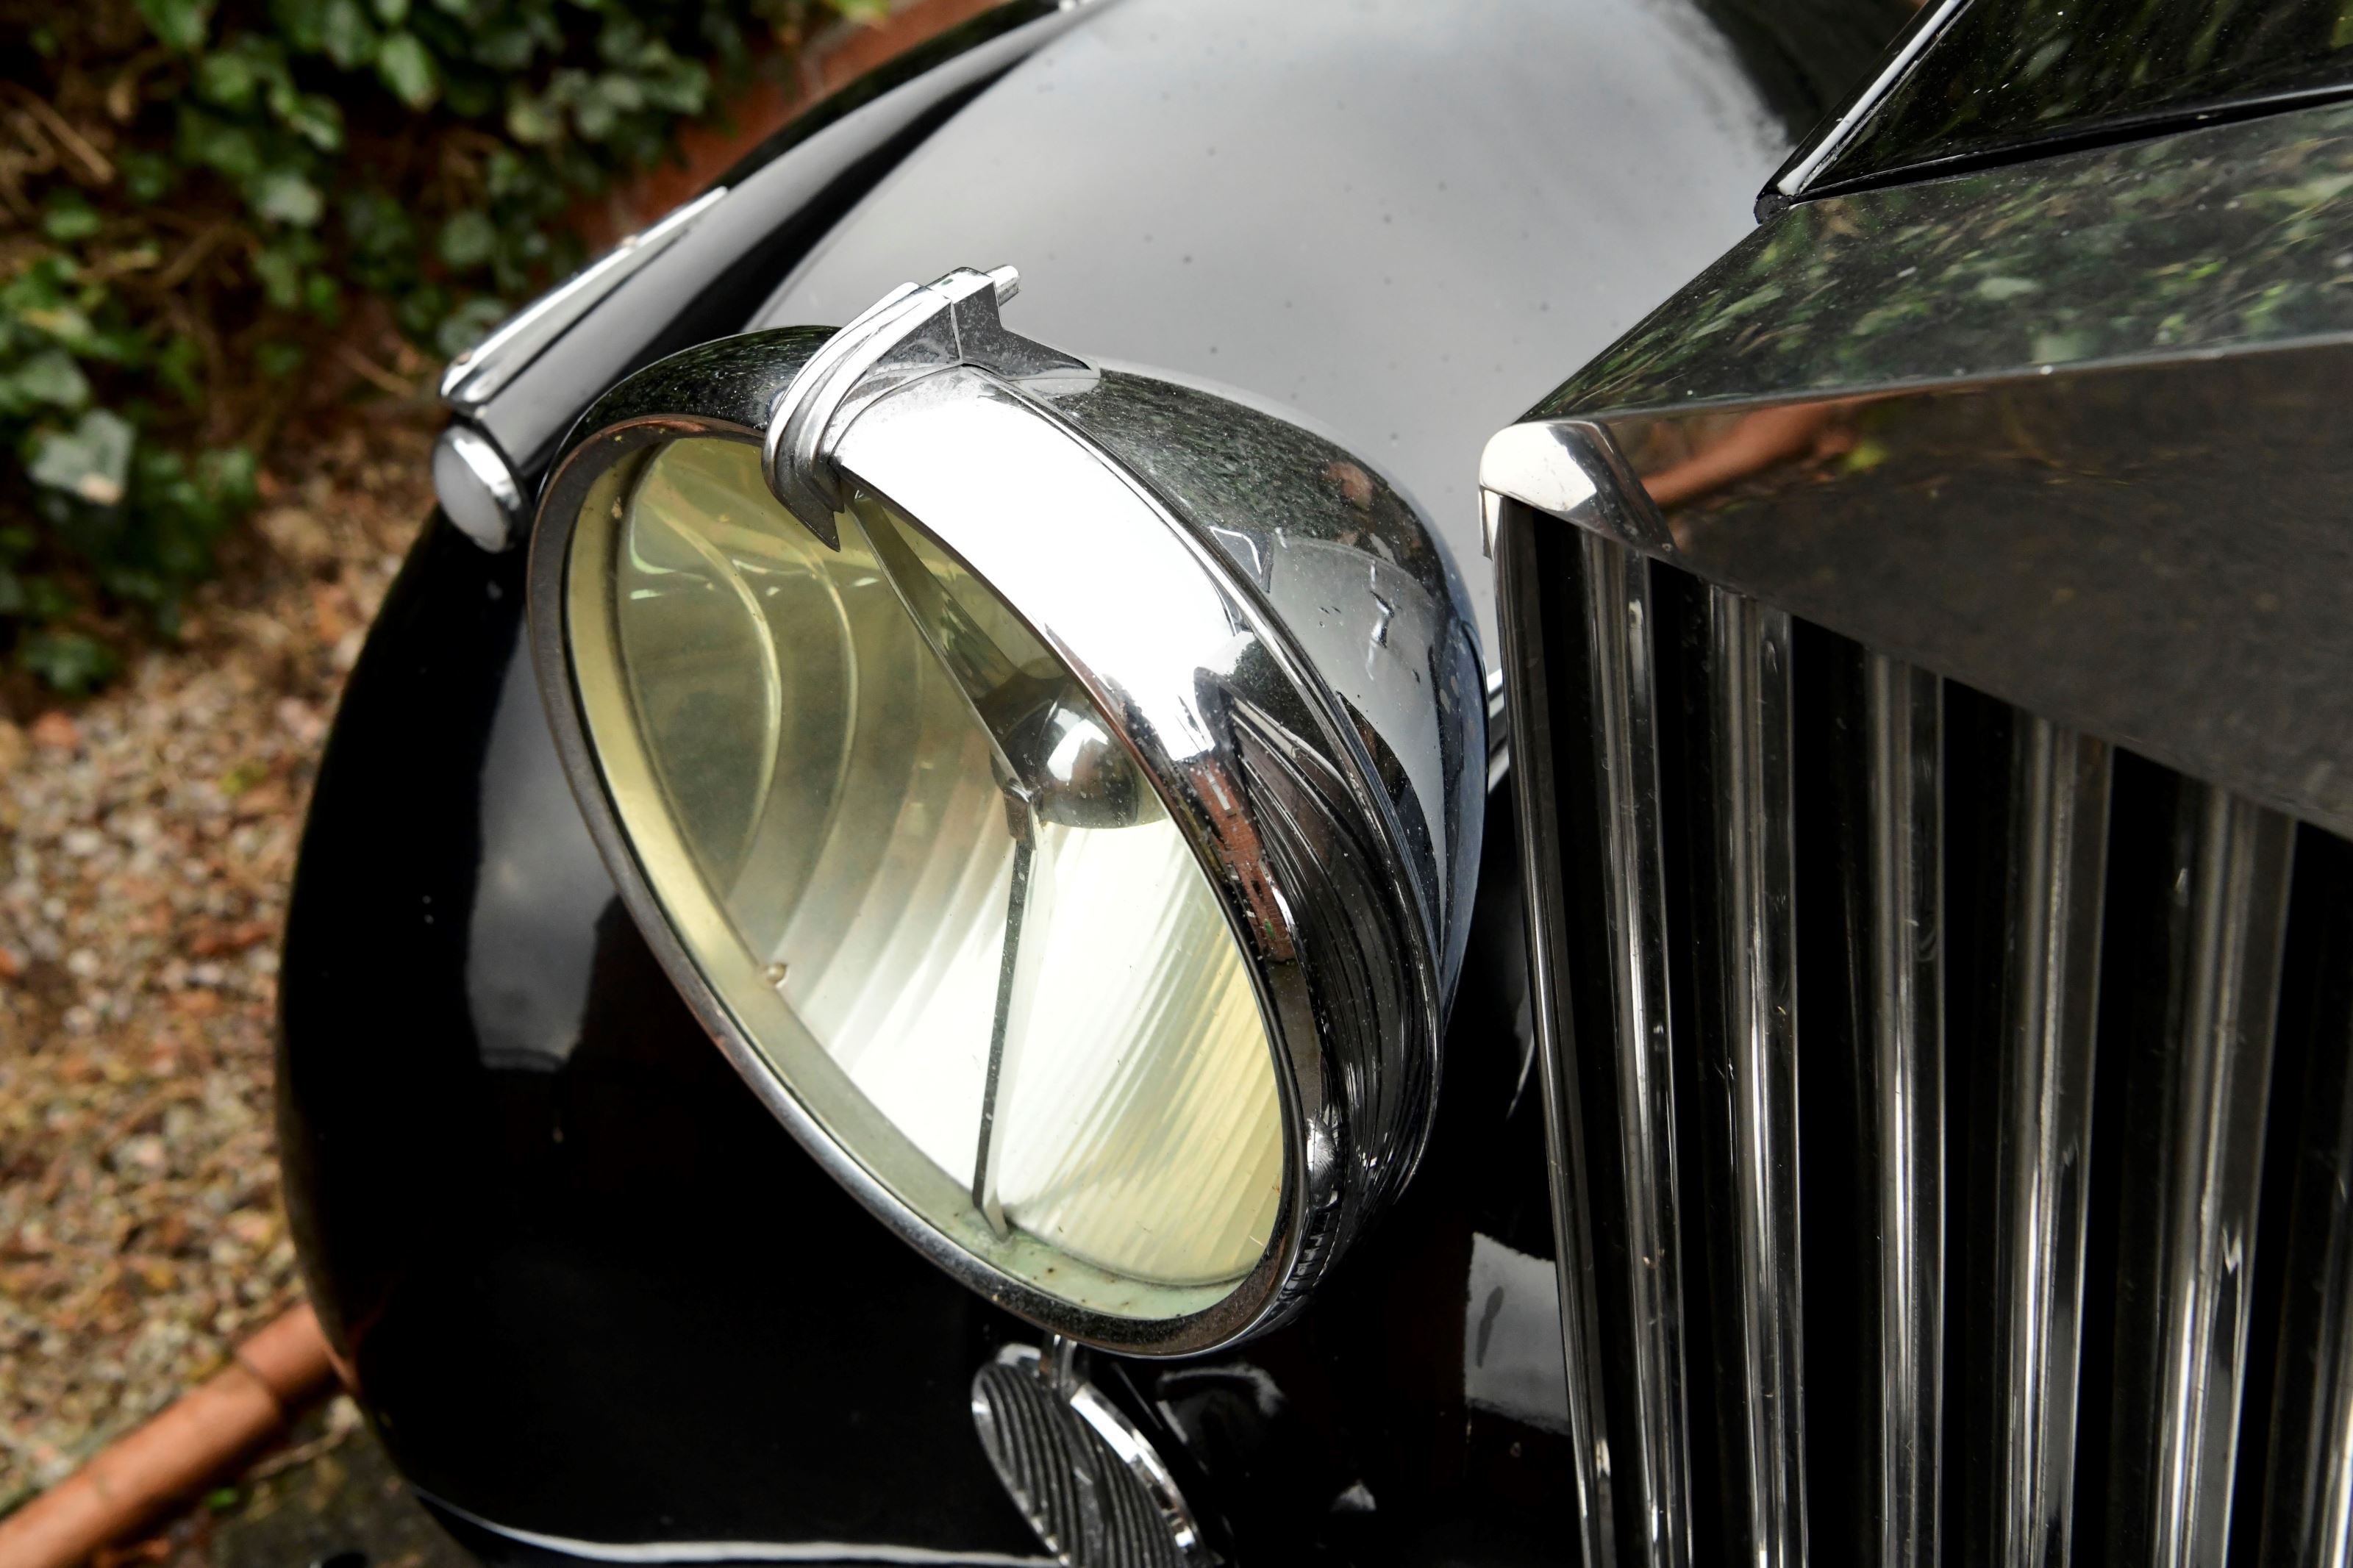 Rolls royce  silver wraith by vincents of reading  wphcmadhwus7fxbruol70